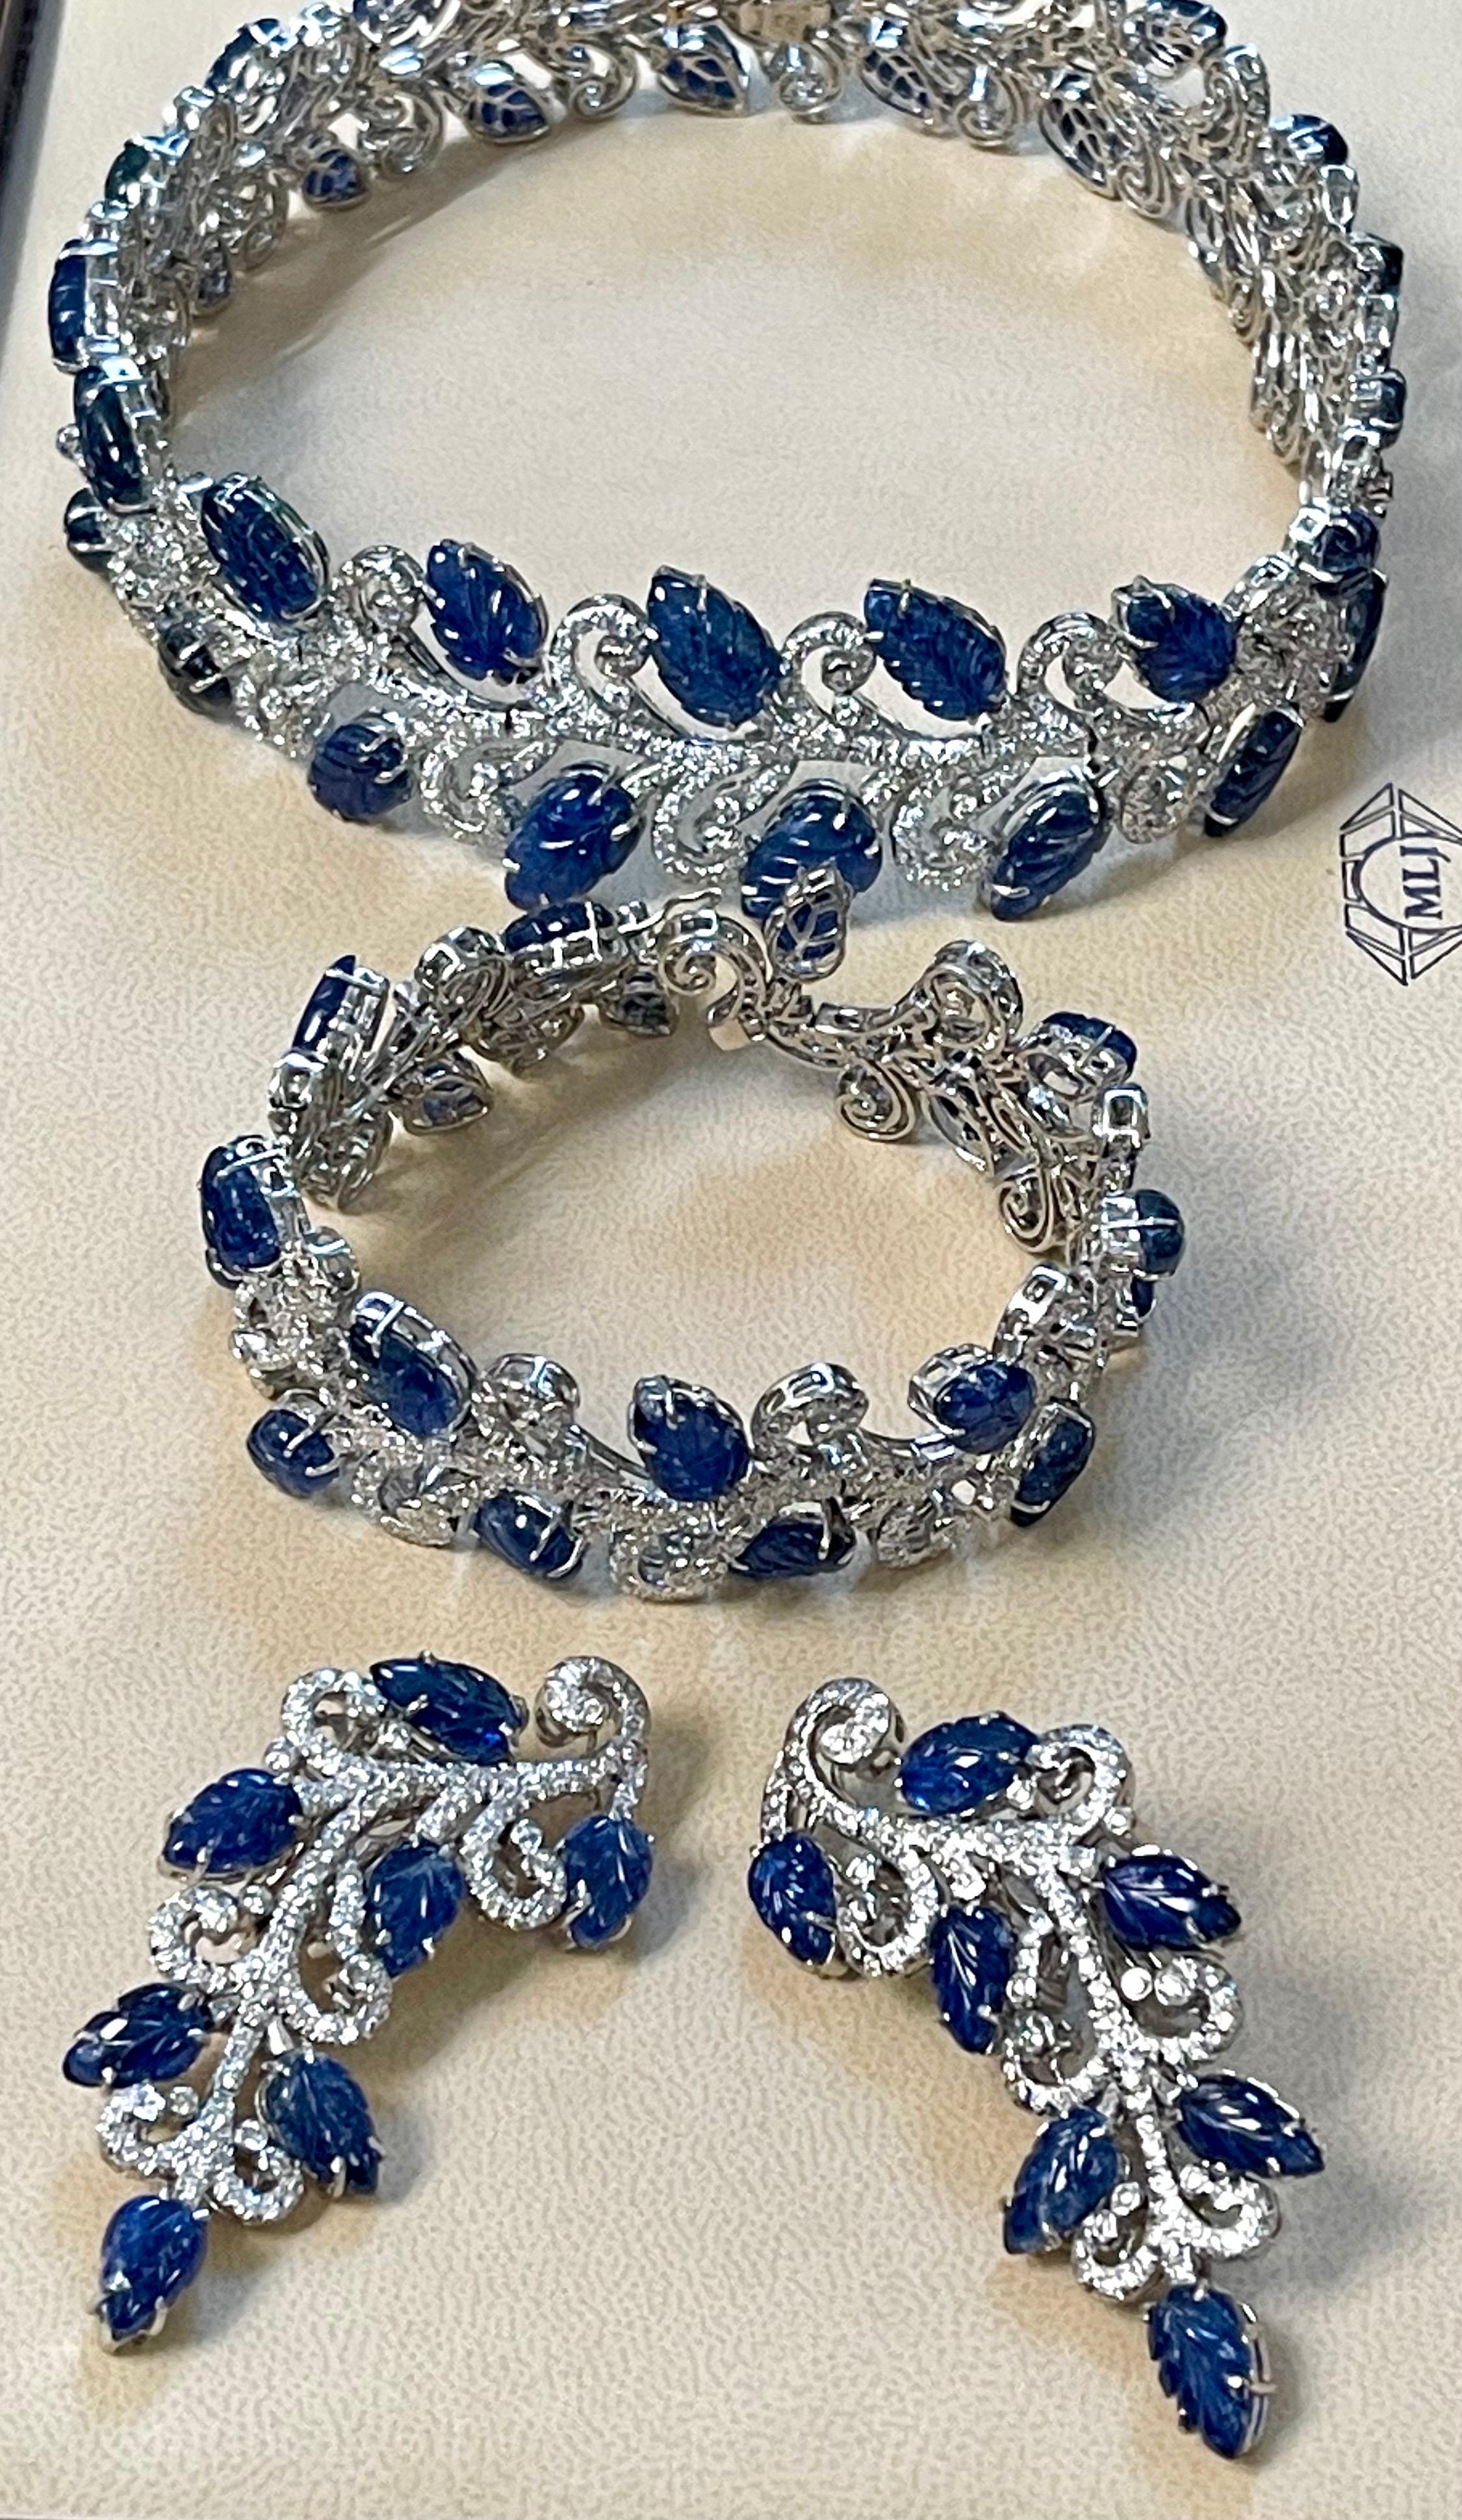 330 Ct Natural Carved Blue Sapphire & 65 Ct Diamond Necklace Bracelet & Earring For Sale 3